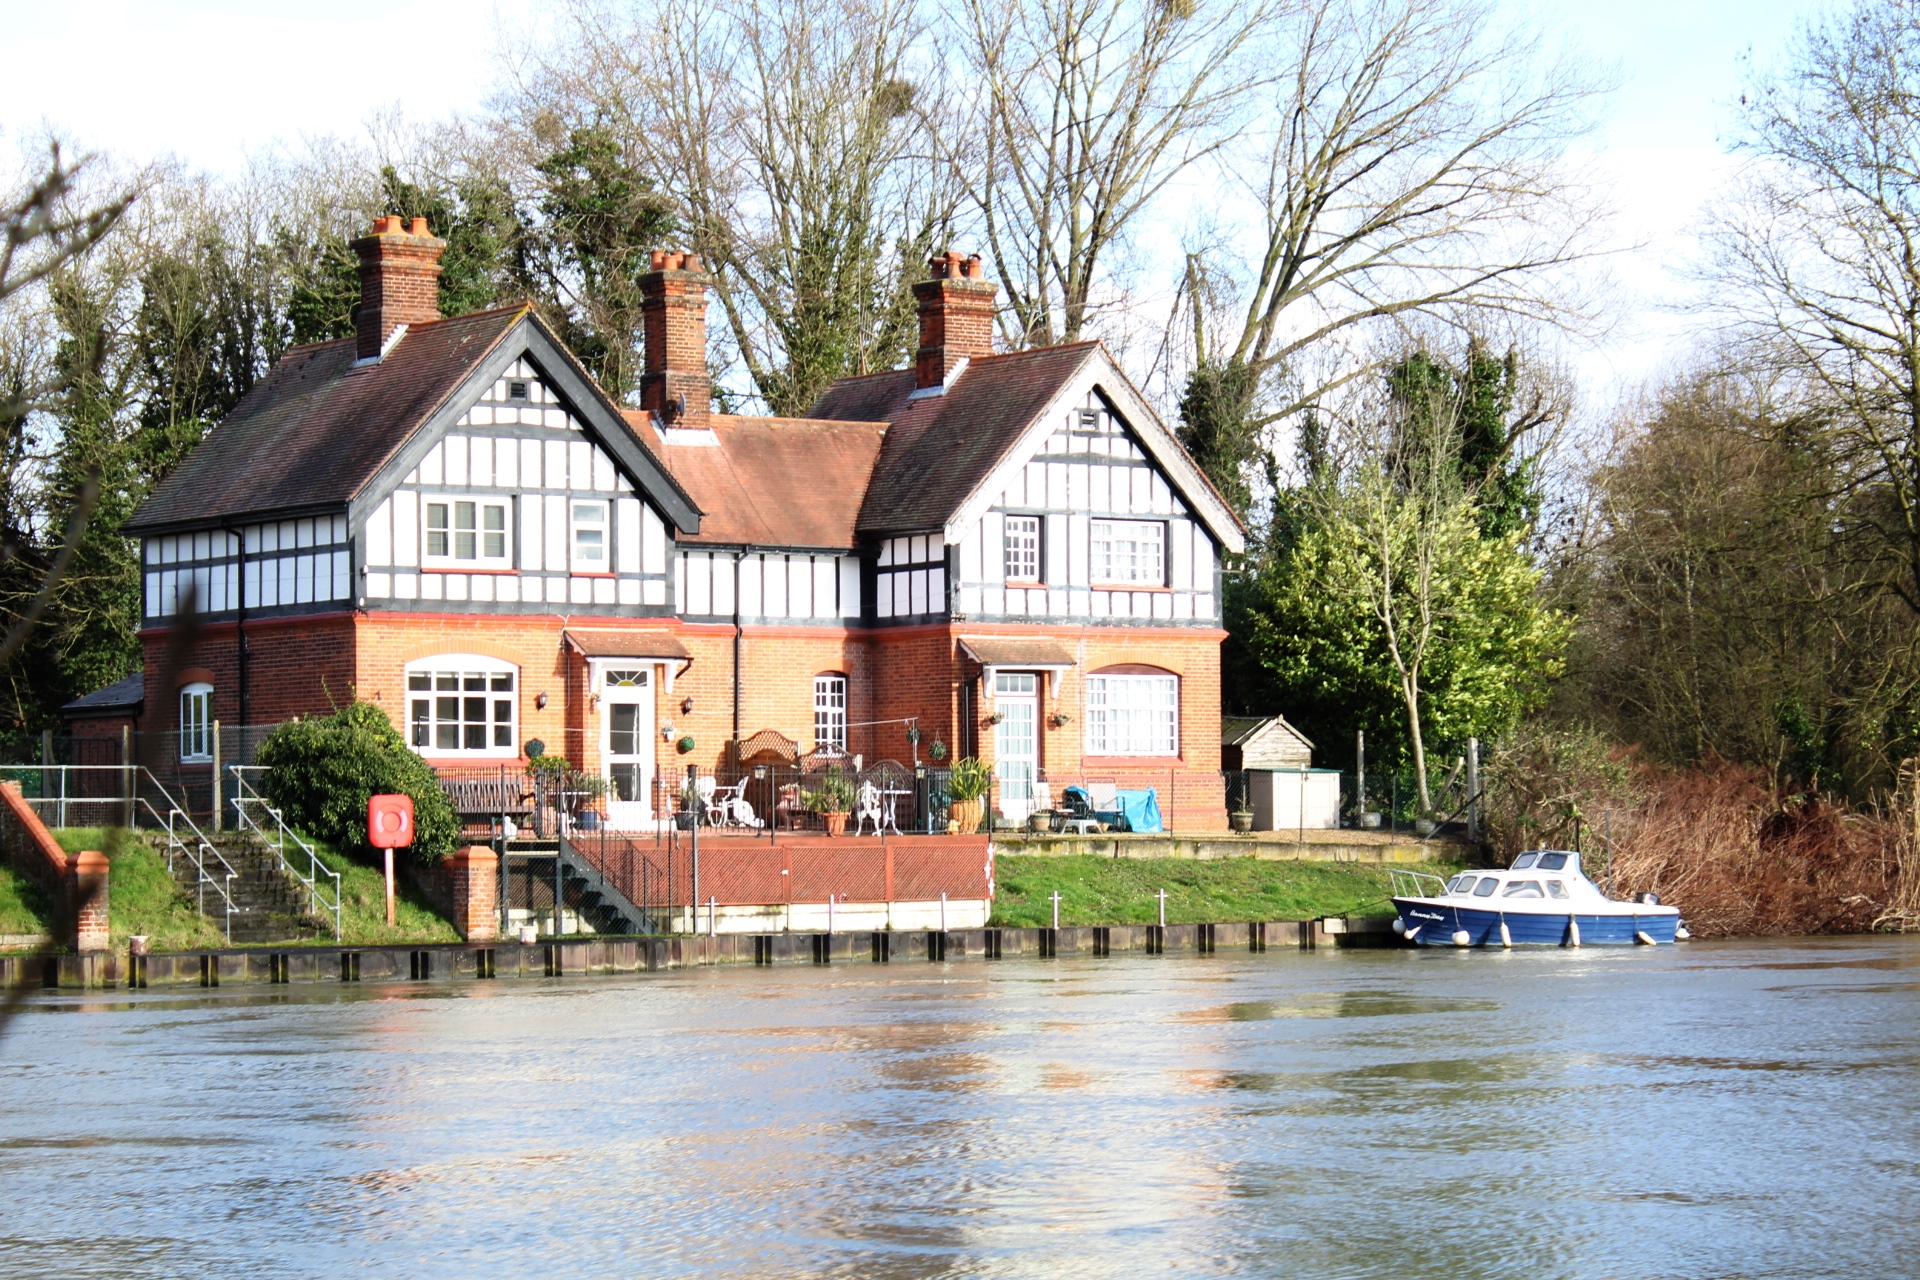 surrey character house on the river.jpg